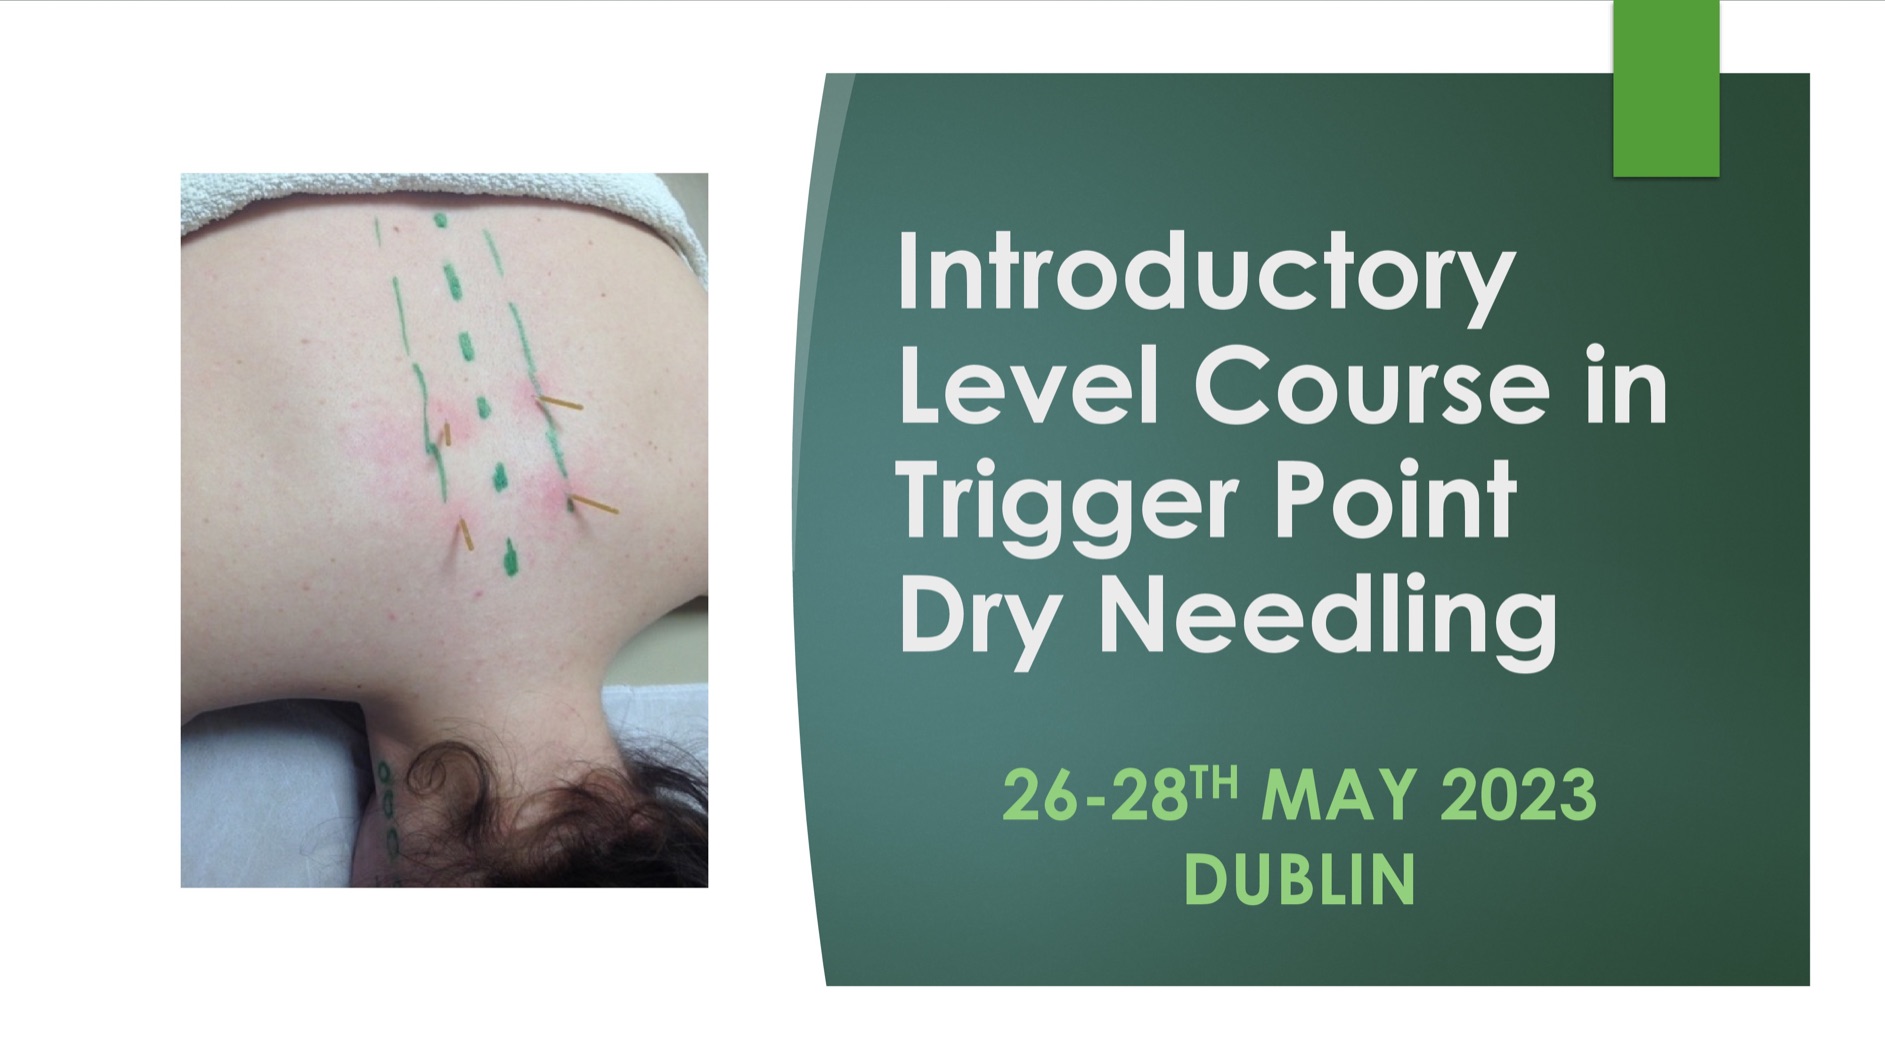 Introductory Level Trigger Point Dry Needling 26-28th May 2023, DUBLIN